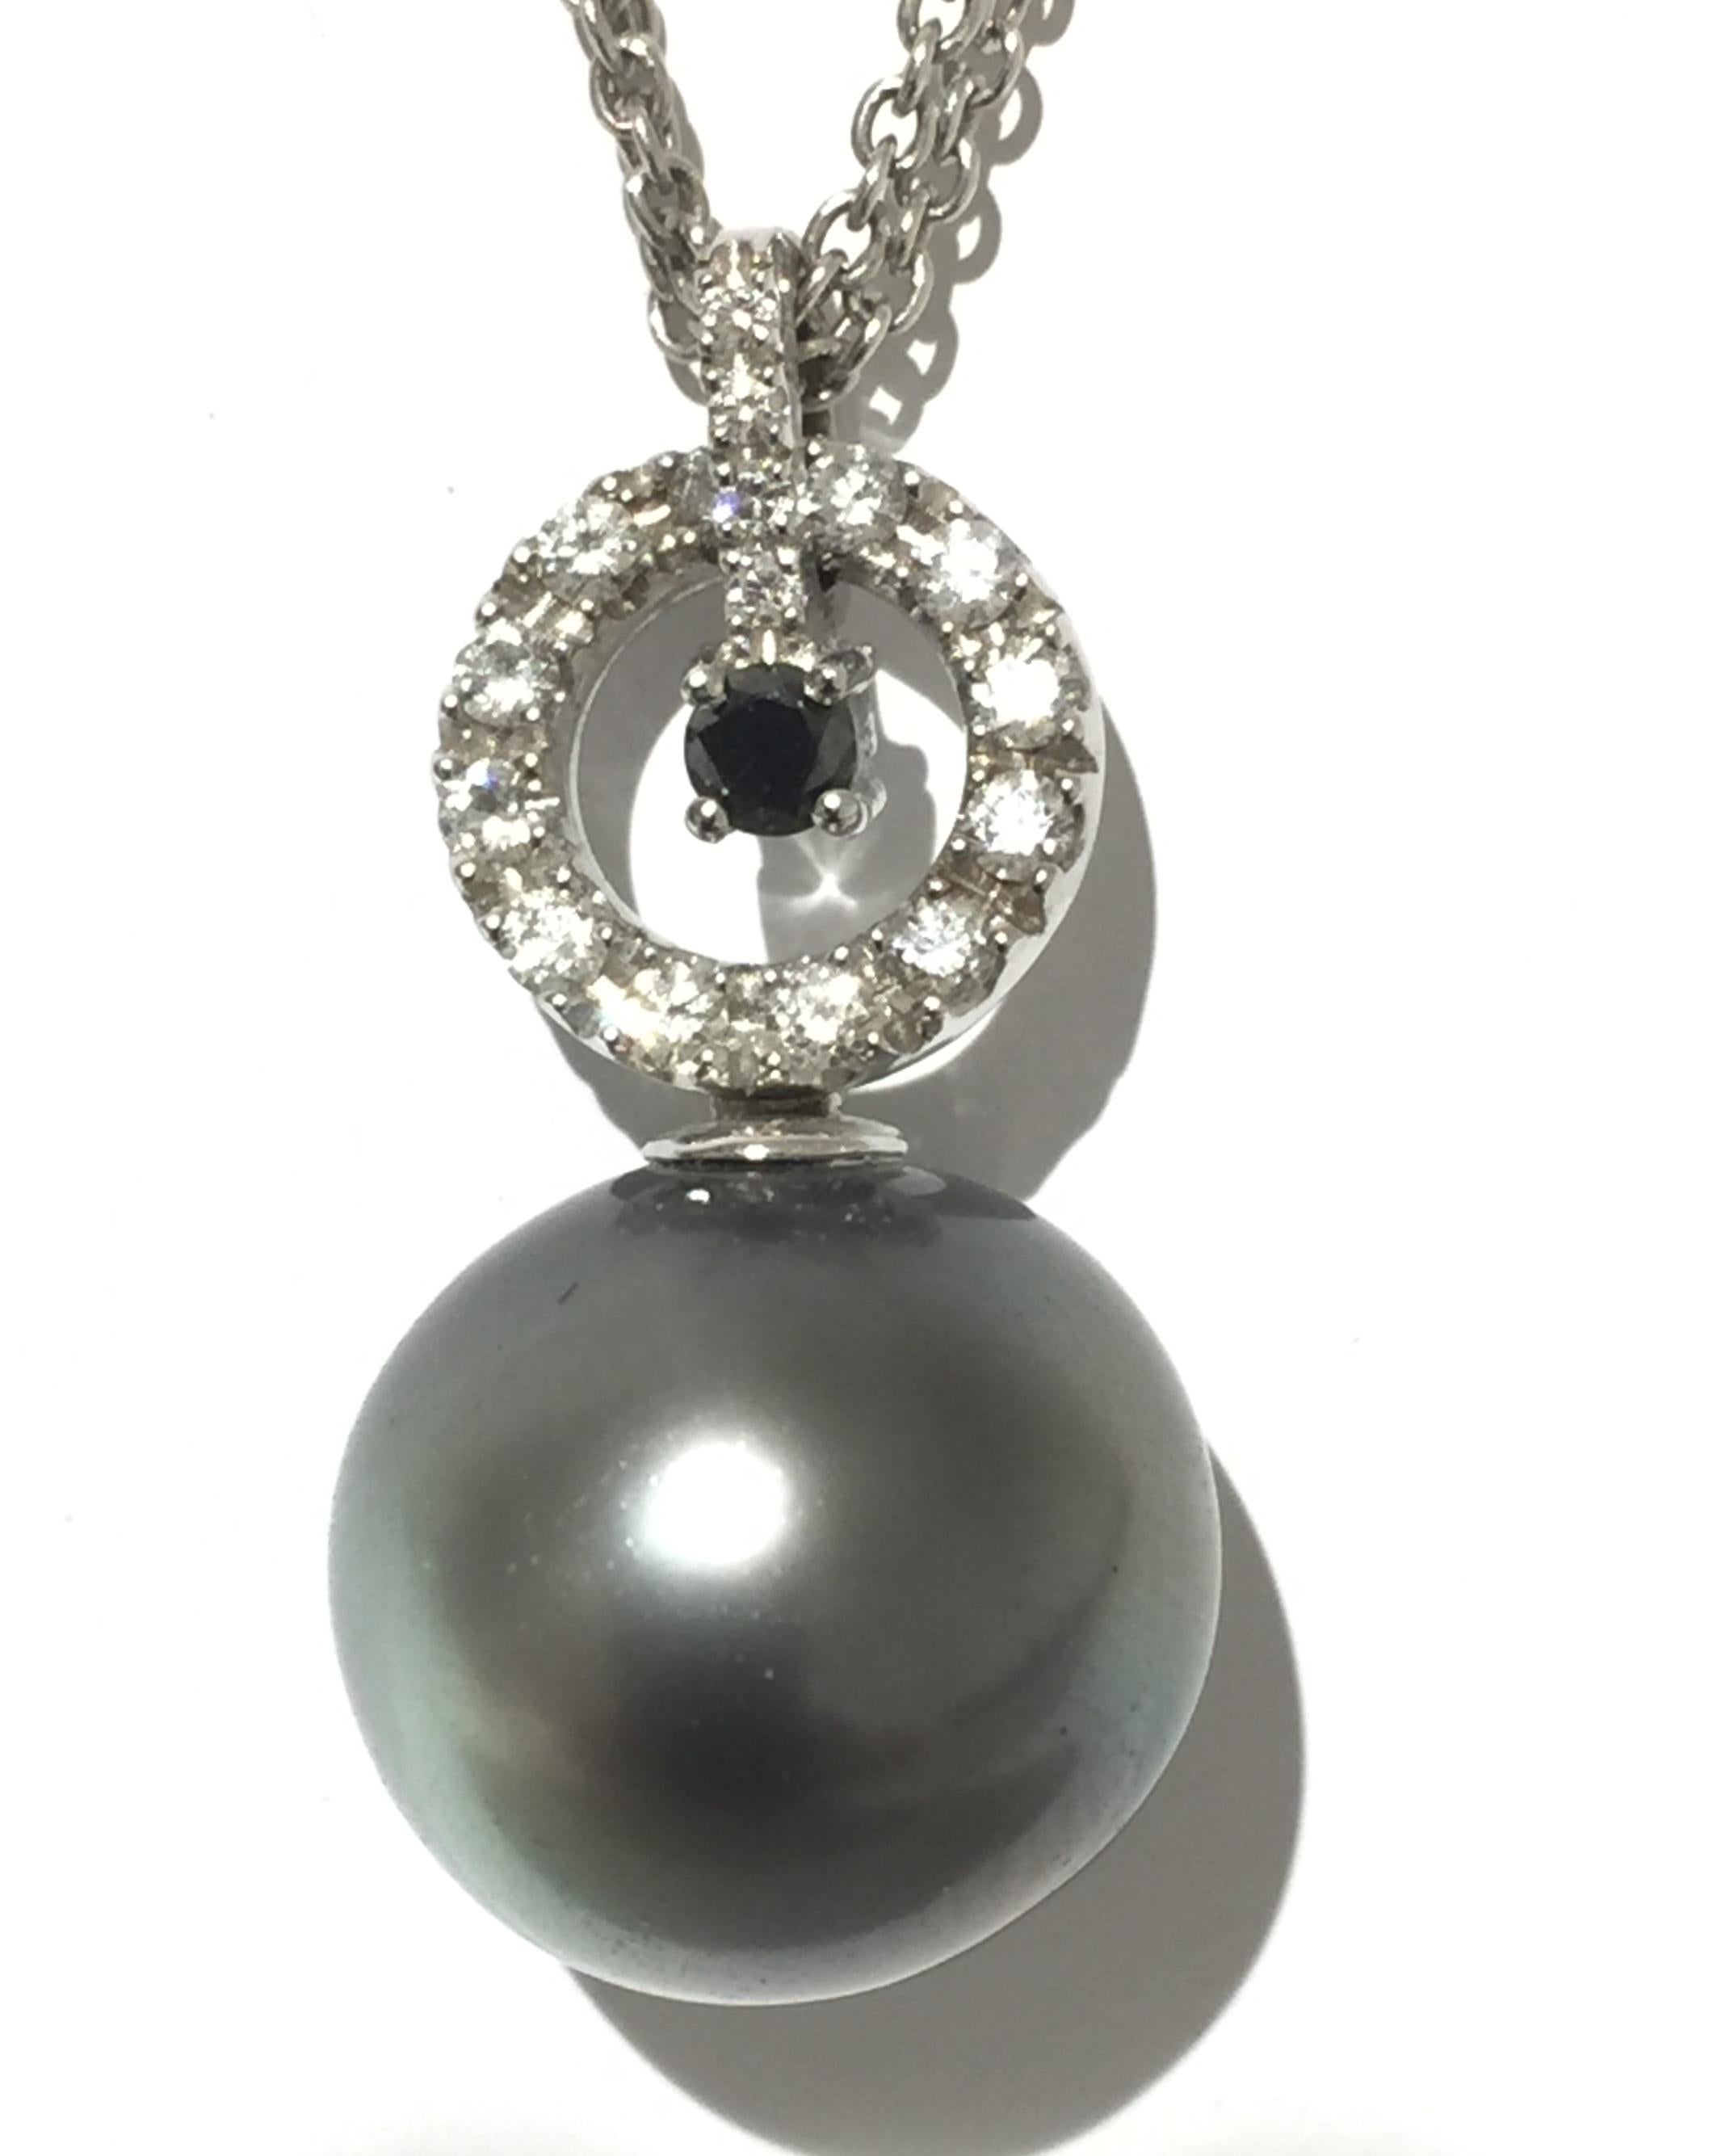 Yvel Pearl and Diamonds Necklace.
18k White Gold 
Pearl
Diamonds 0.21ctw
N1CHRITHW